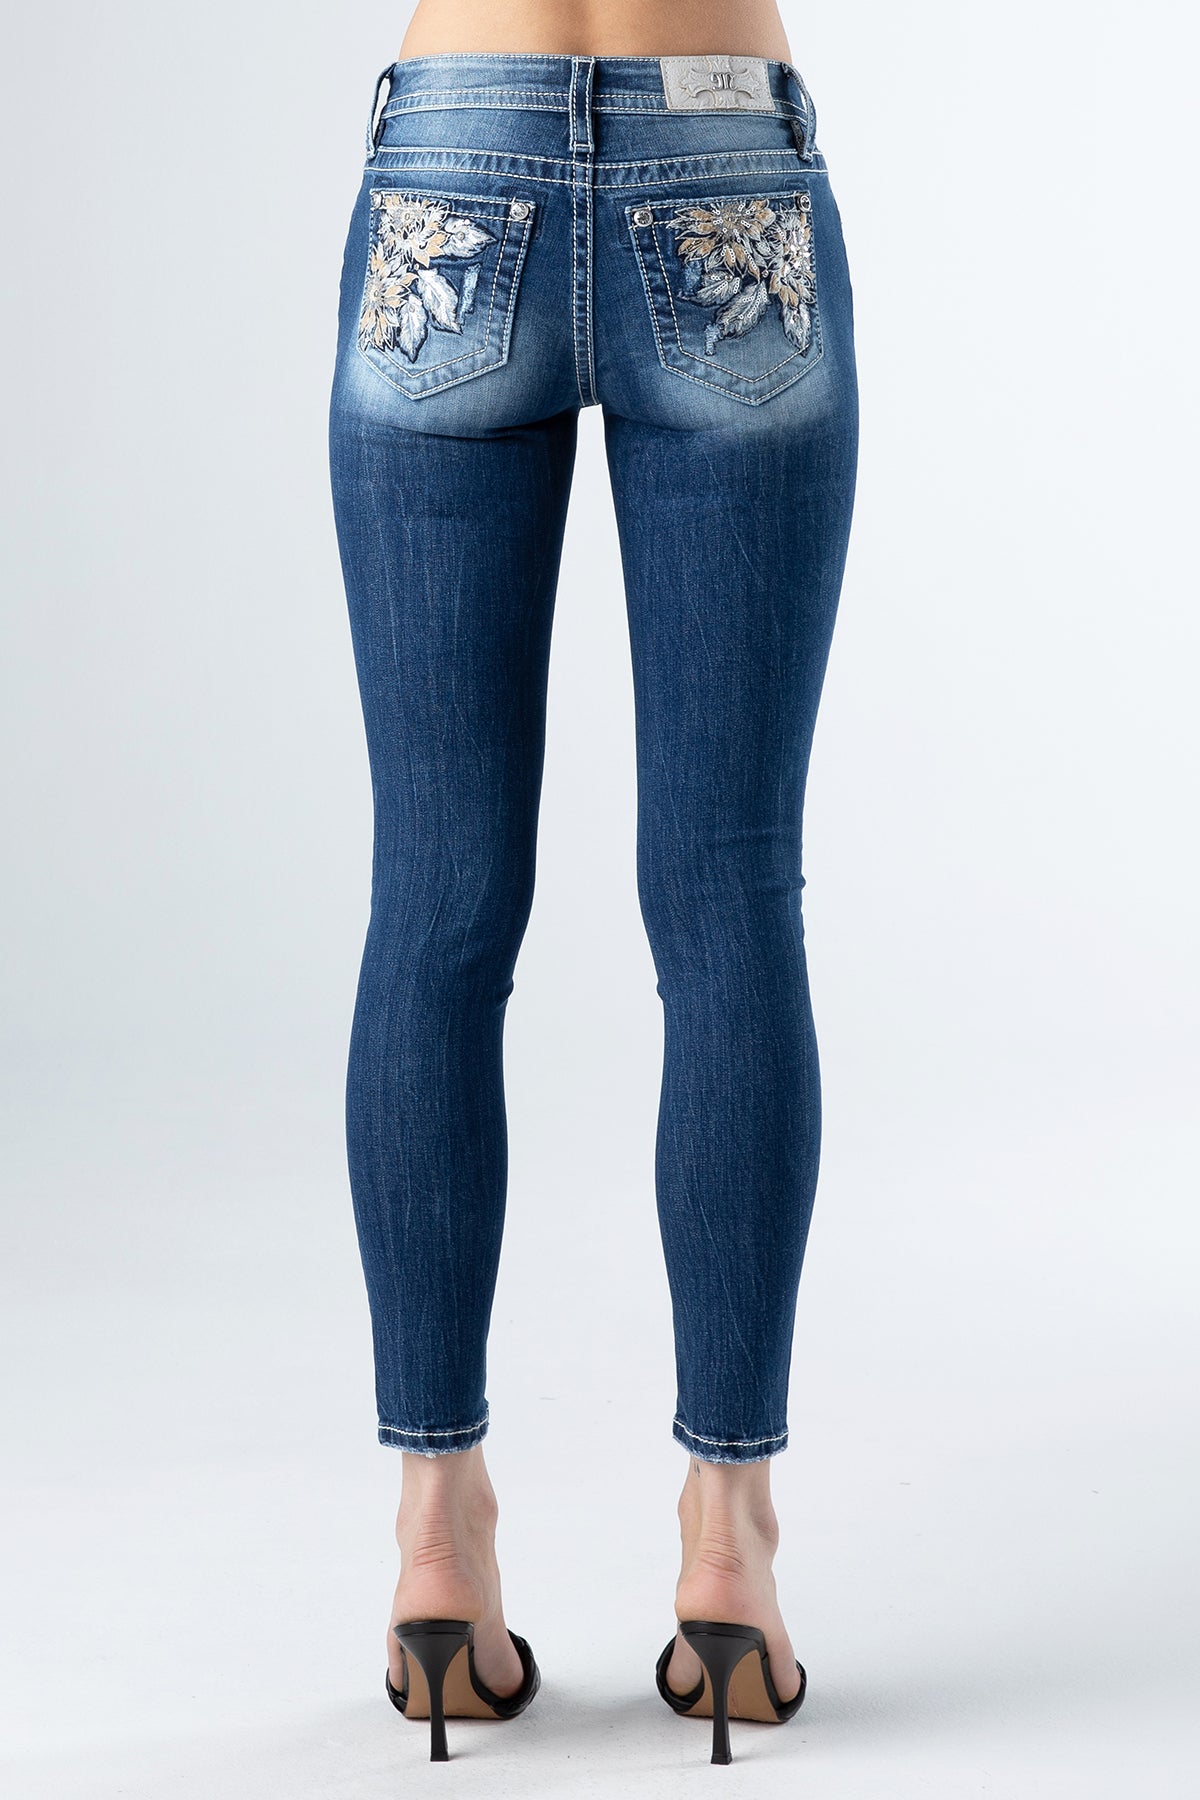 Coral Flower Leaves Jeans